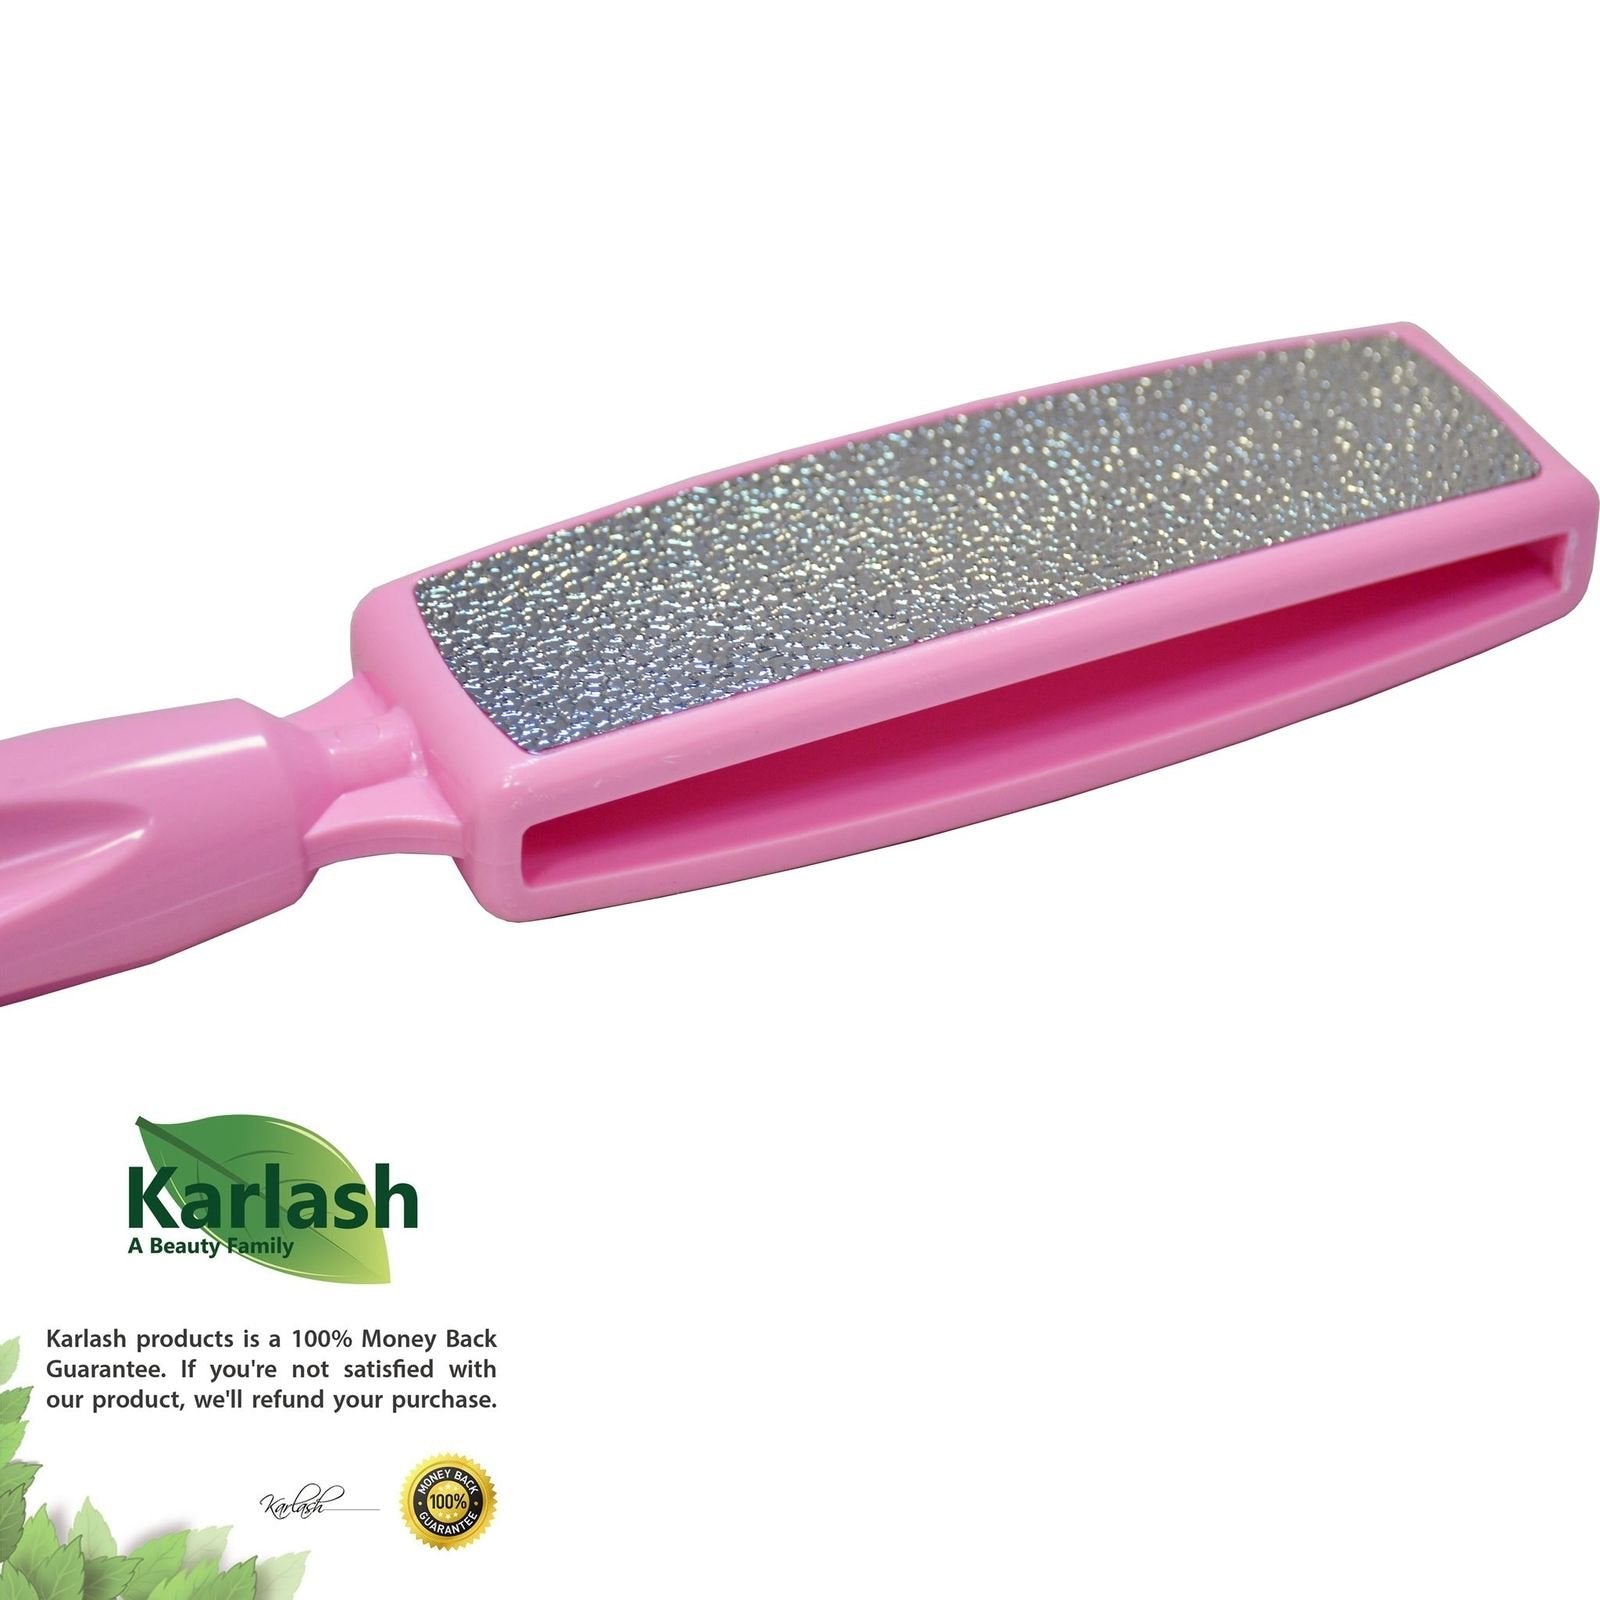 Karlash 2-Sided Hypoallergenic Nickel Foot File for Callus Trimming and Callus Removal, Pink